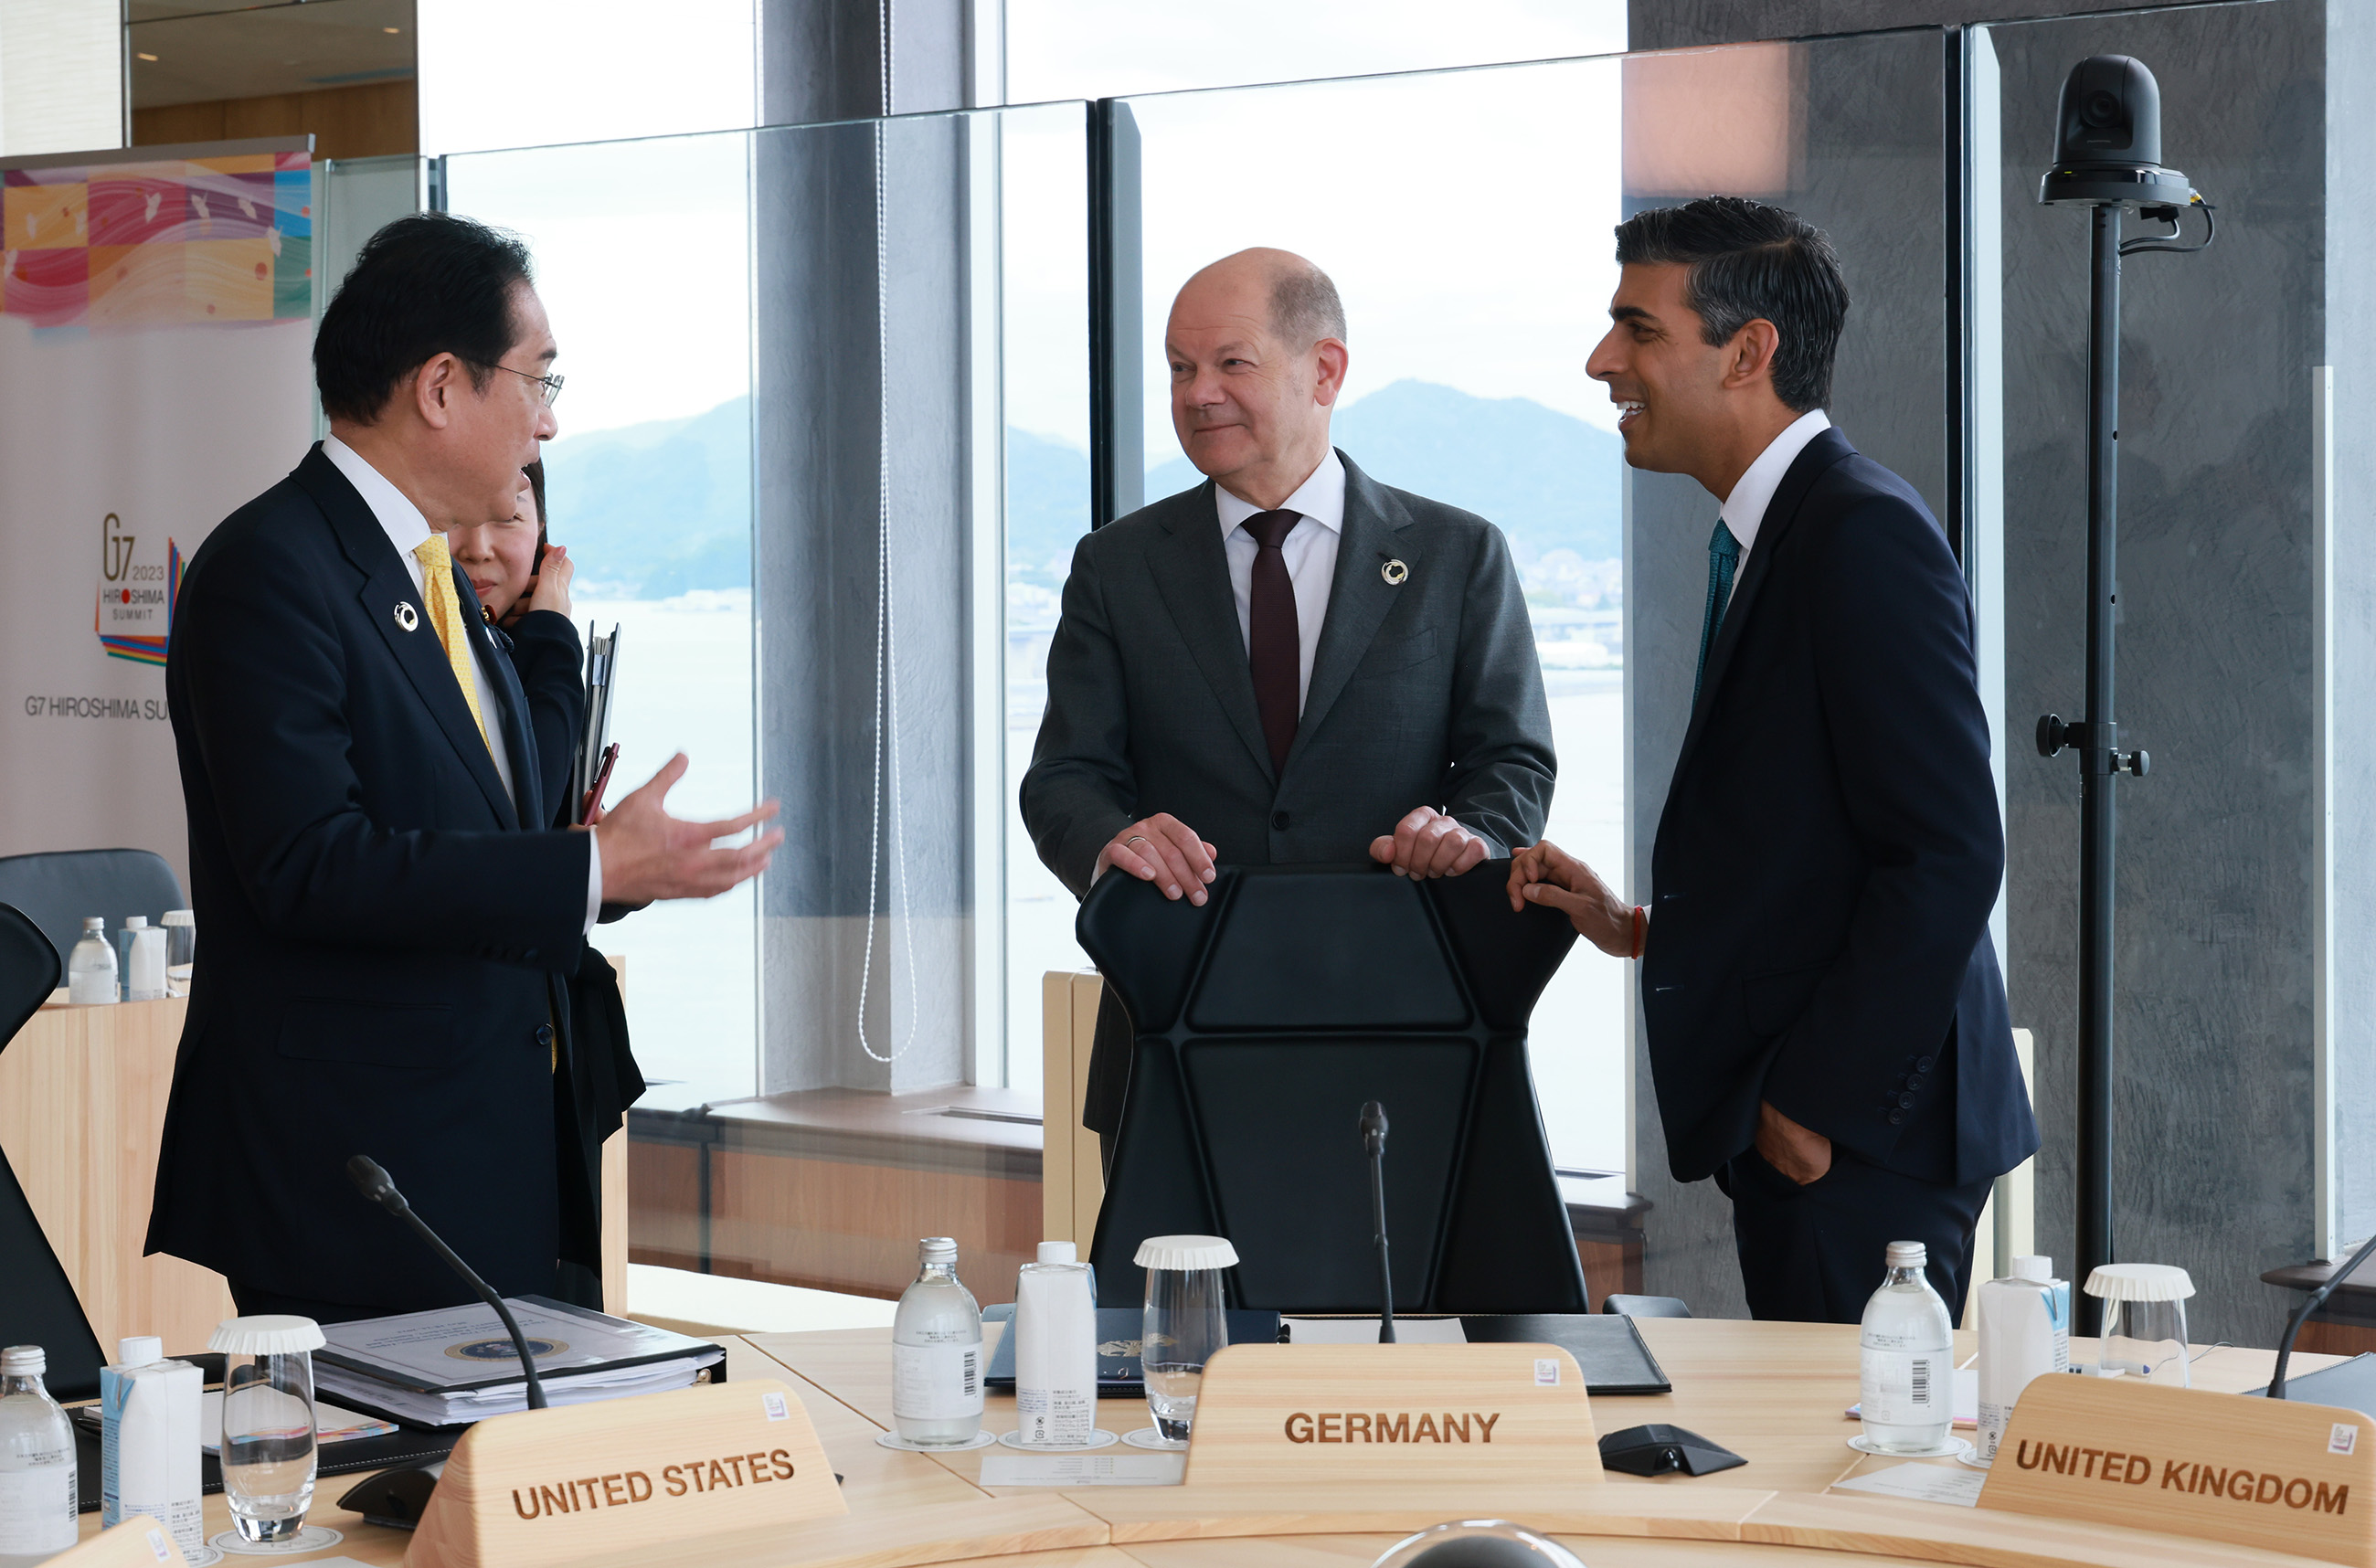 Prime Minister Kishida interacting with other leaders (5)